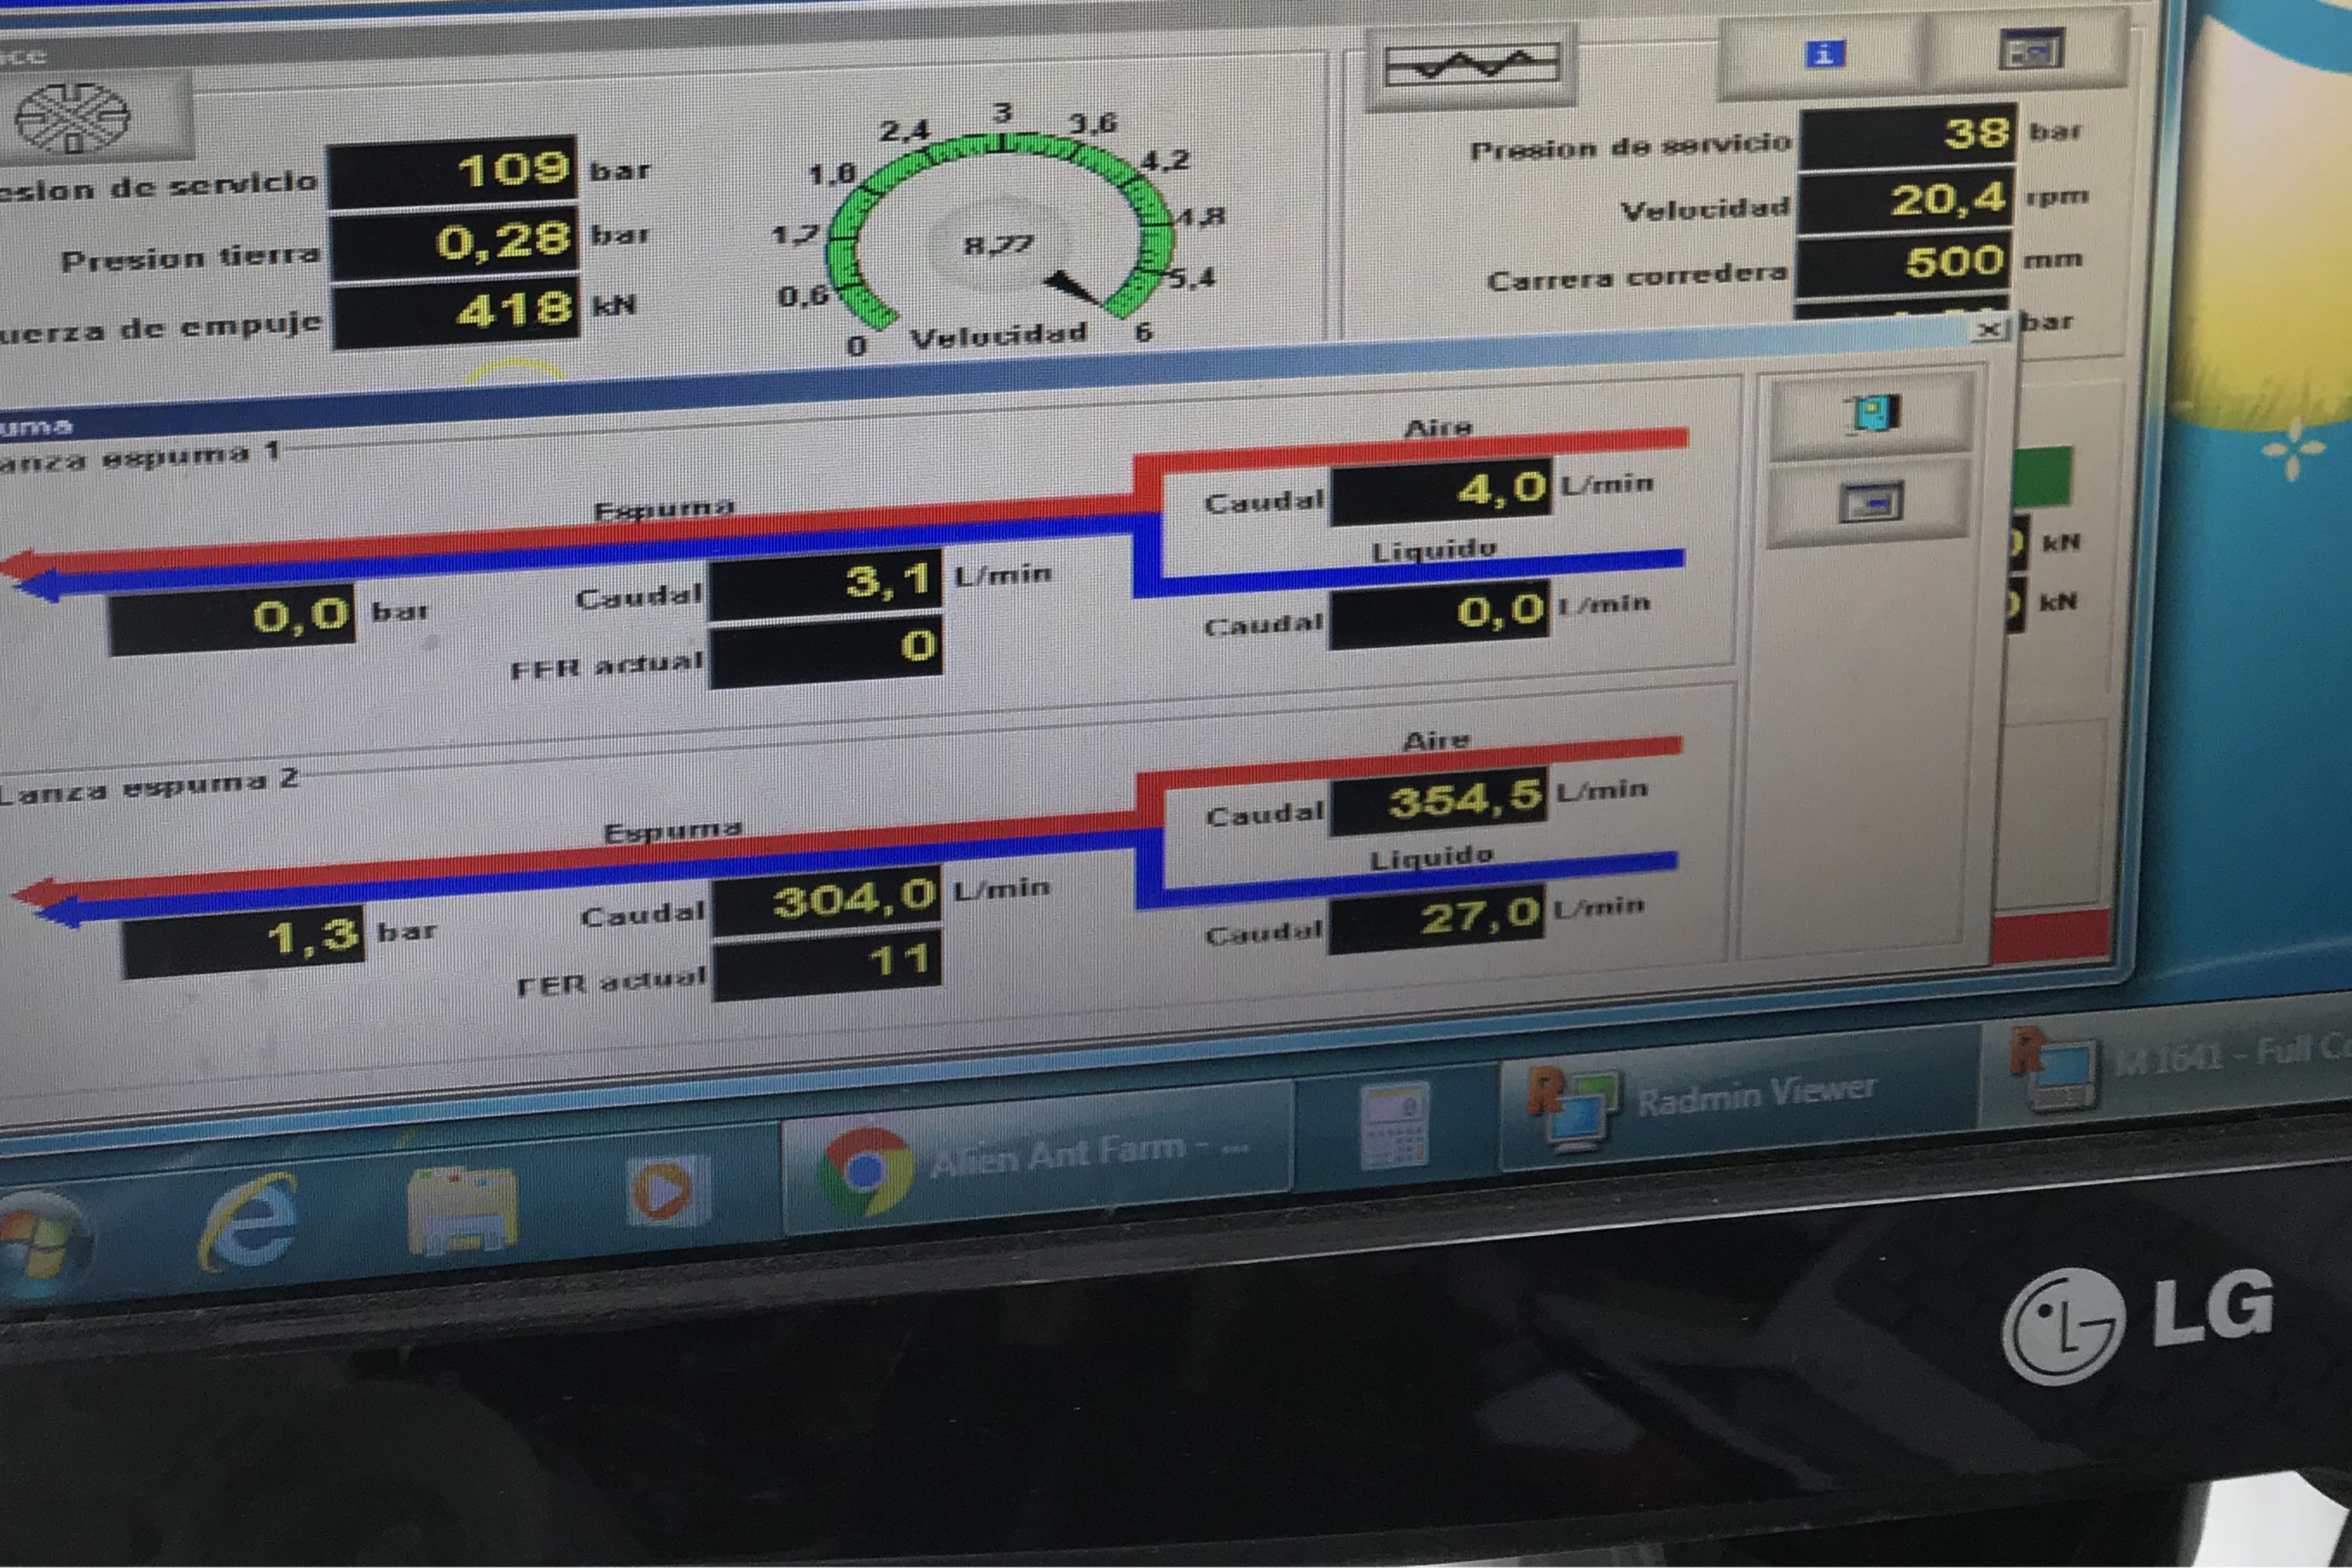 Monitor showing TBM tunneling data